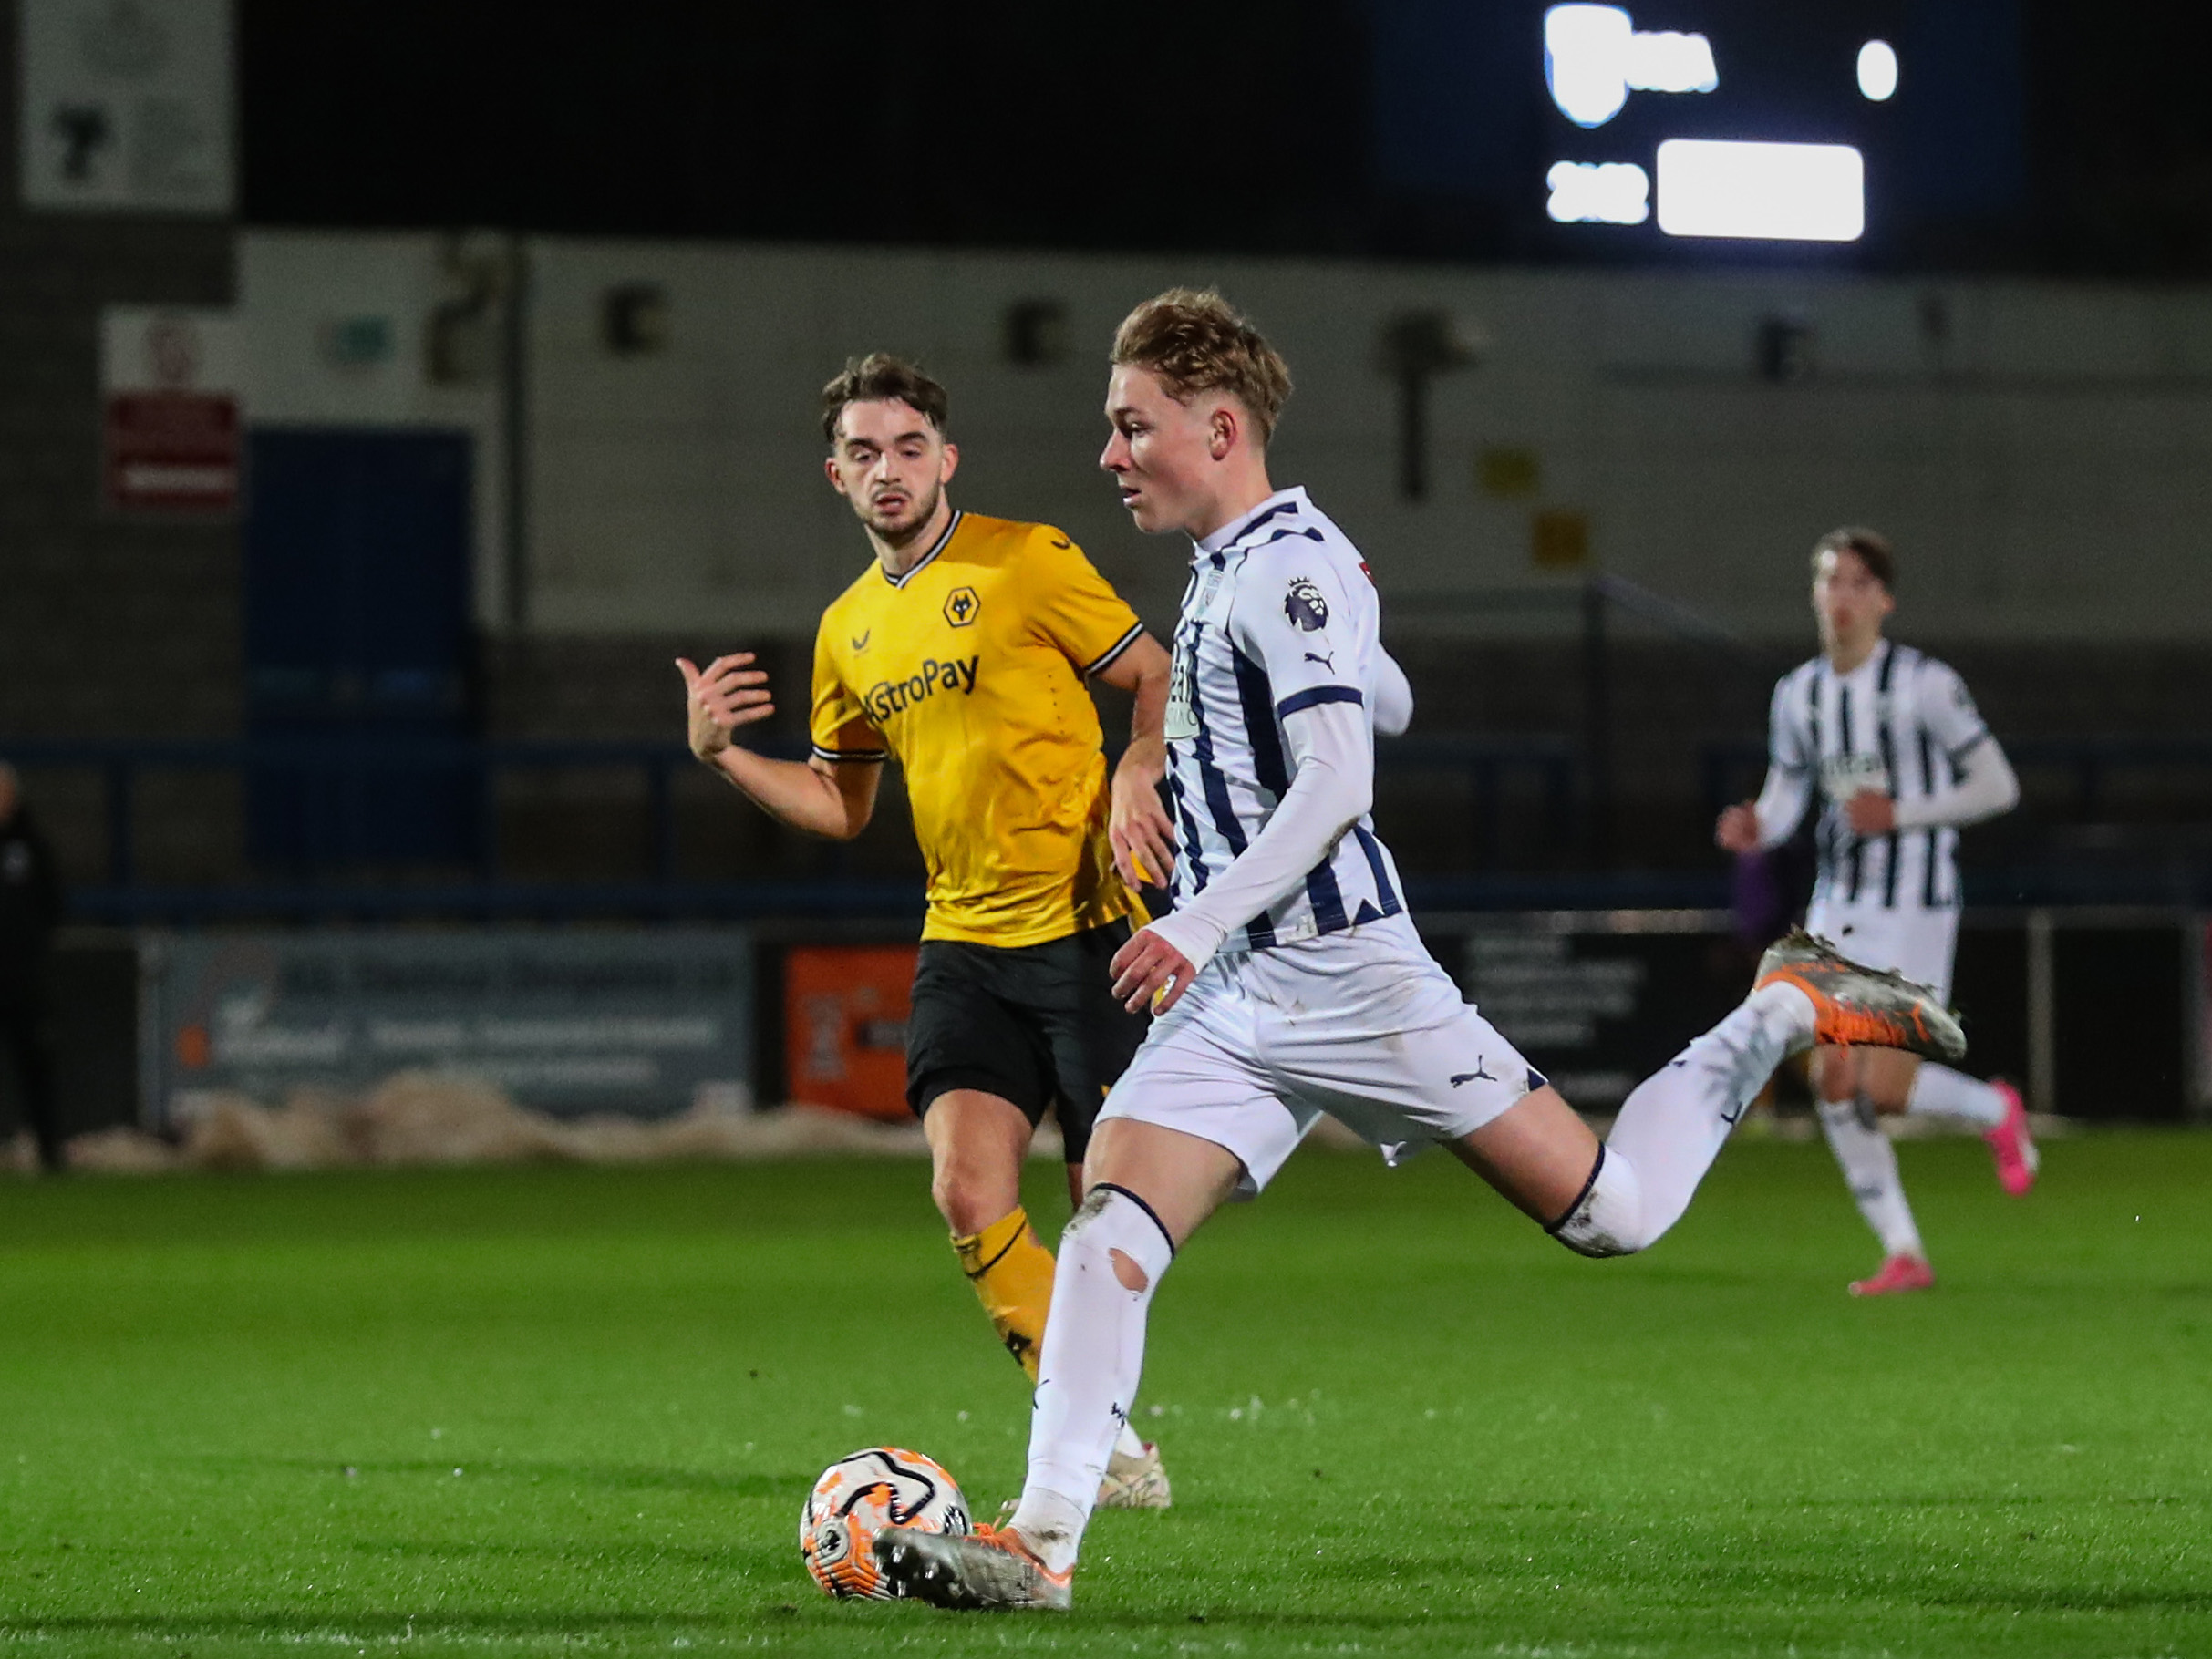 Ollie Bostock in action for Albion's PL2 team against Wolves at New Bucks Head